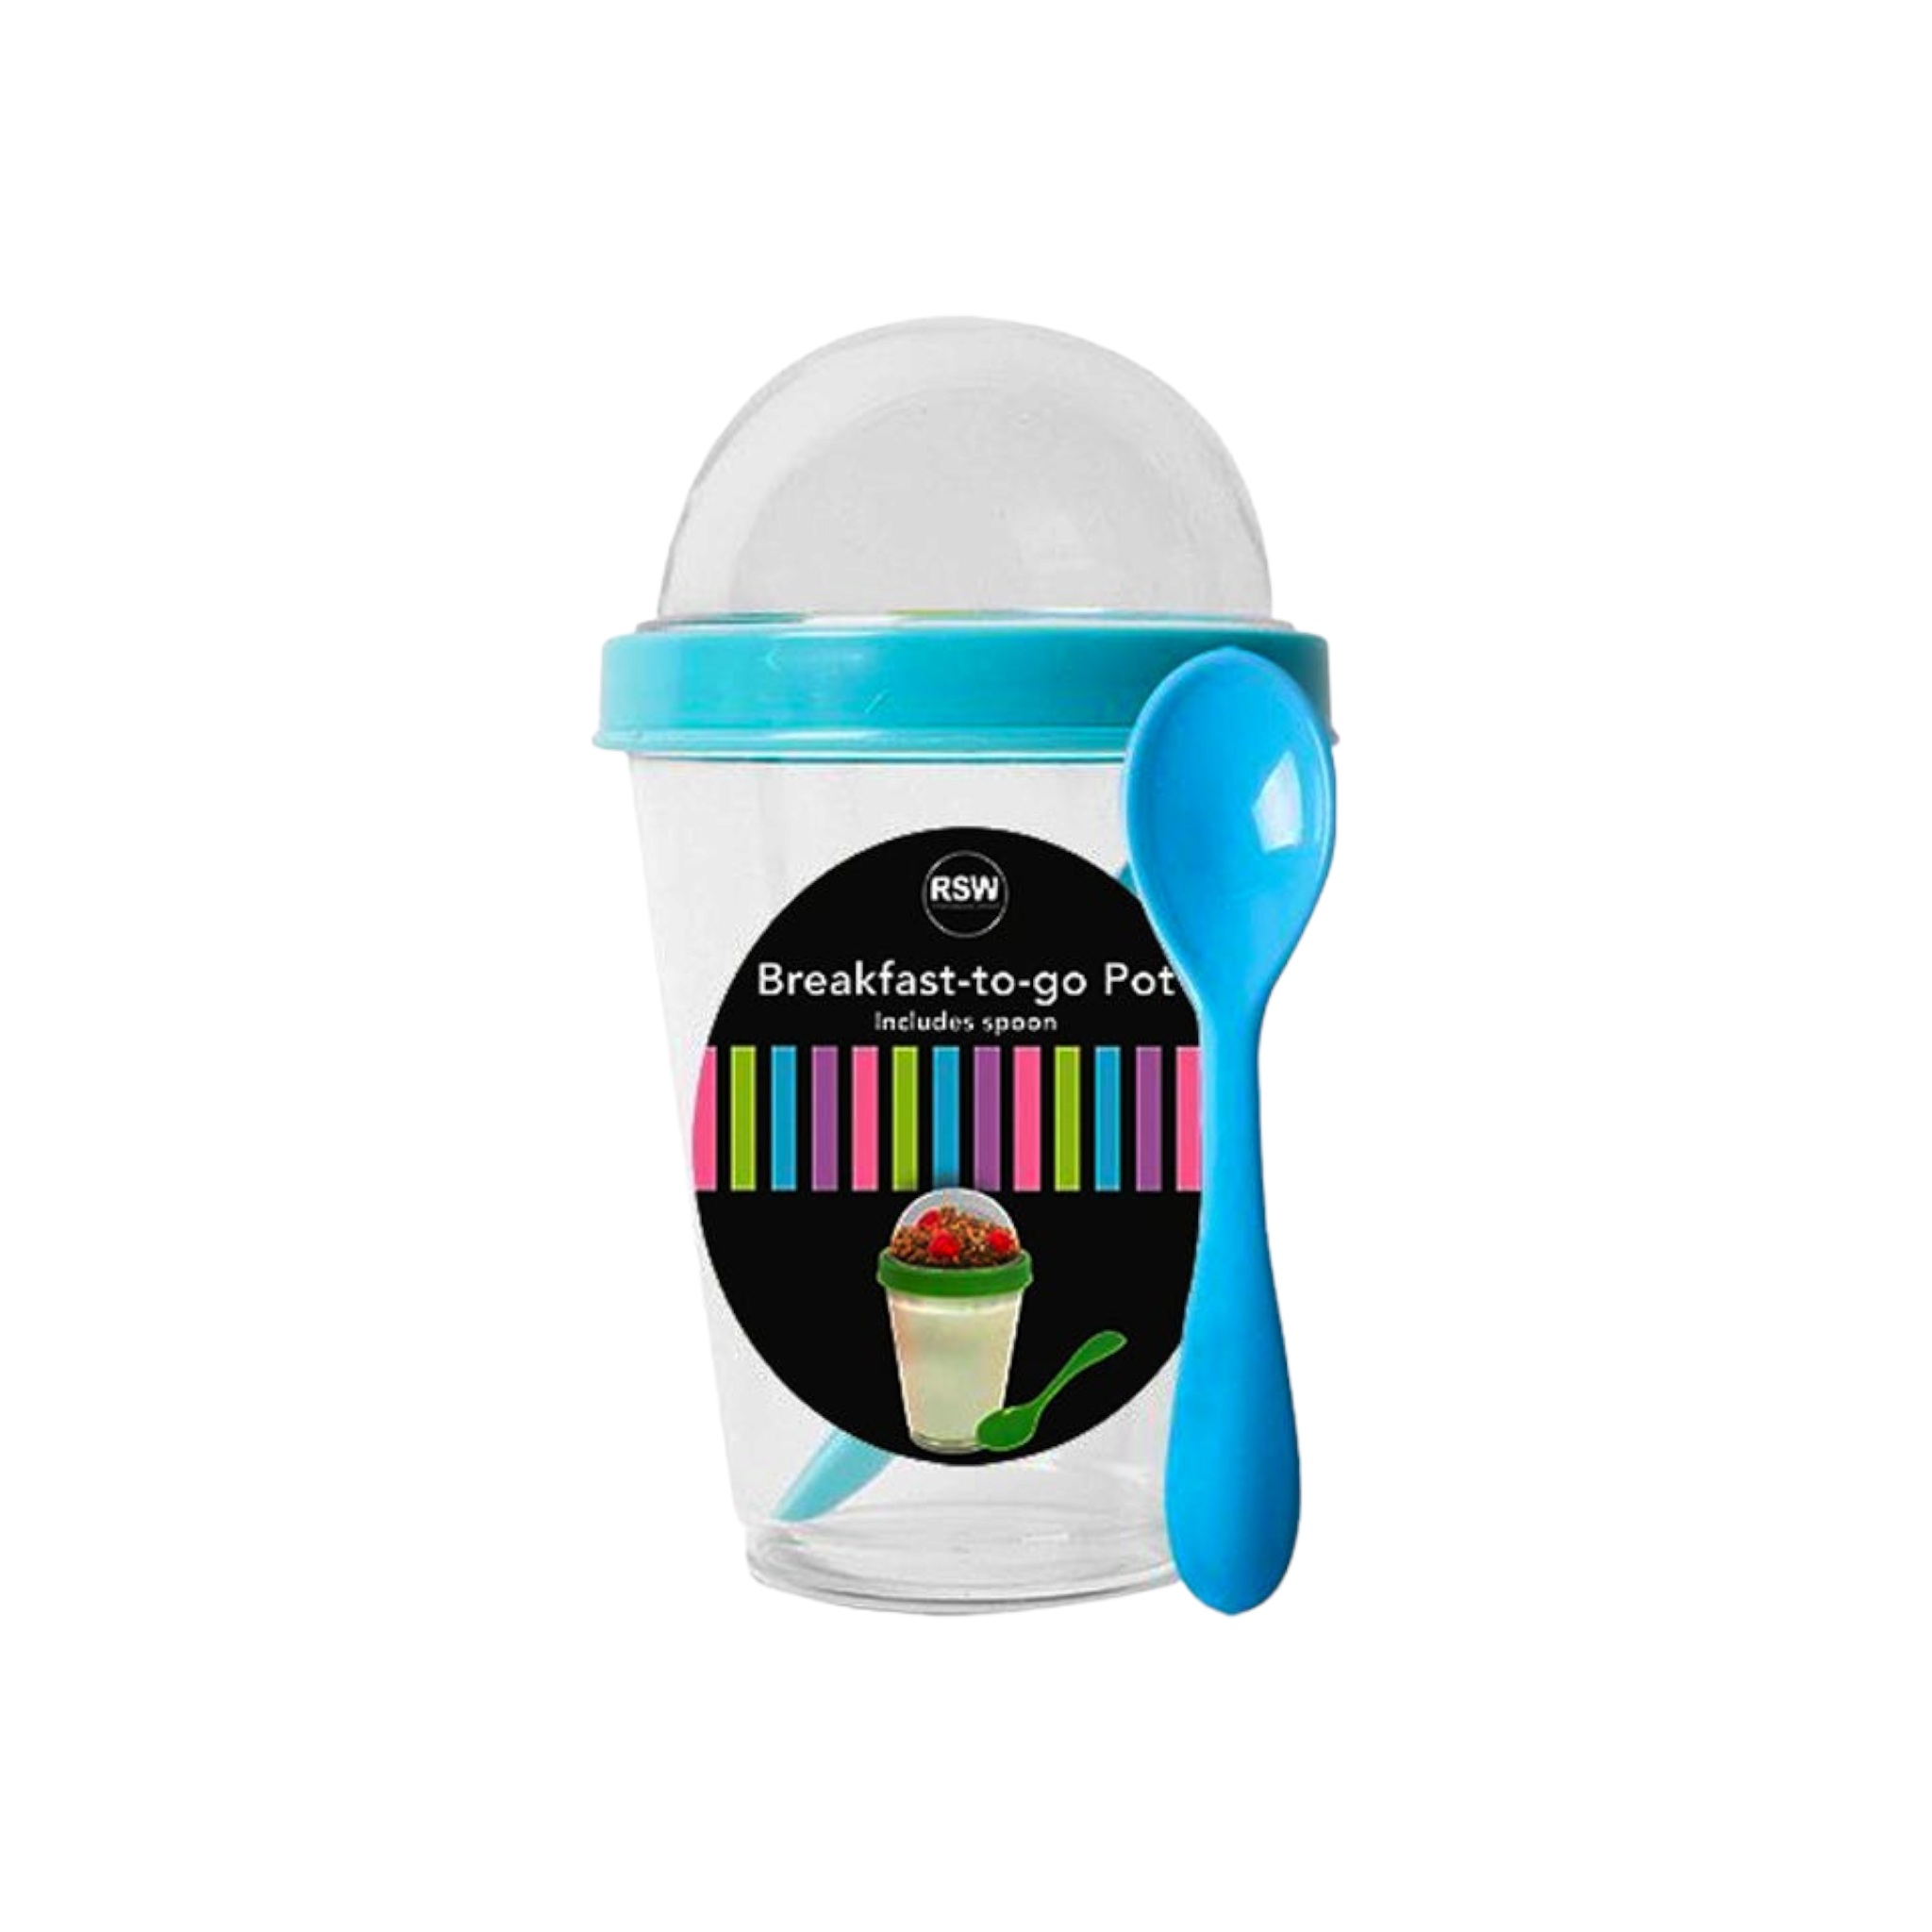 350ml Acrylic Smoothie Breakfast-to-Go Pot with Spoon